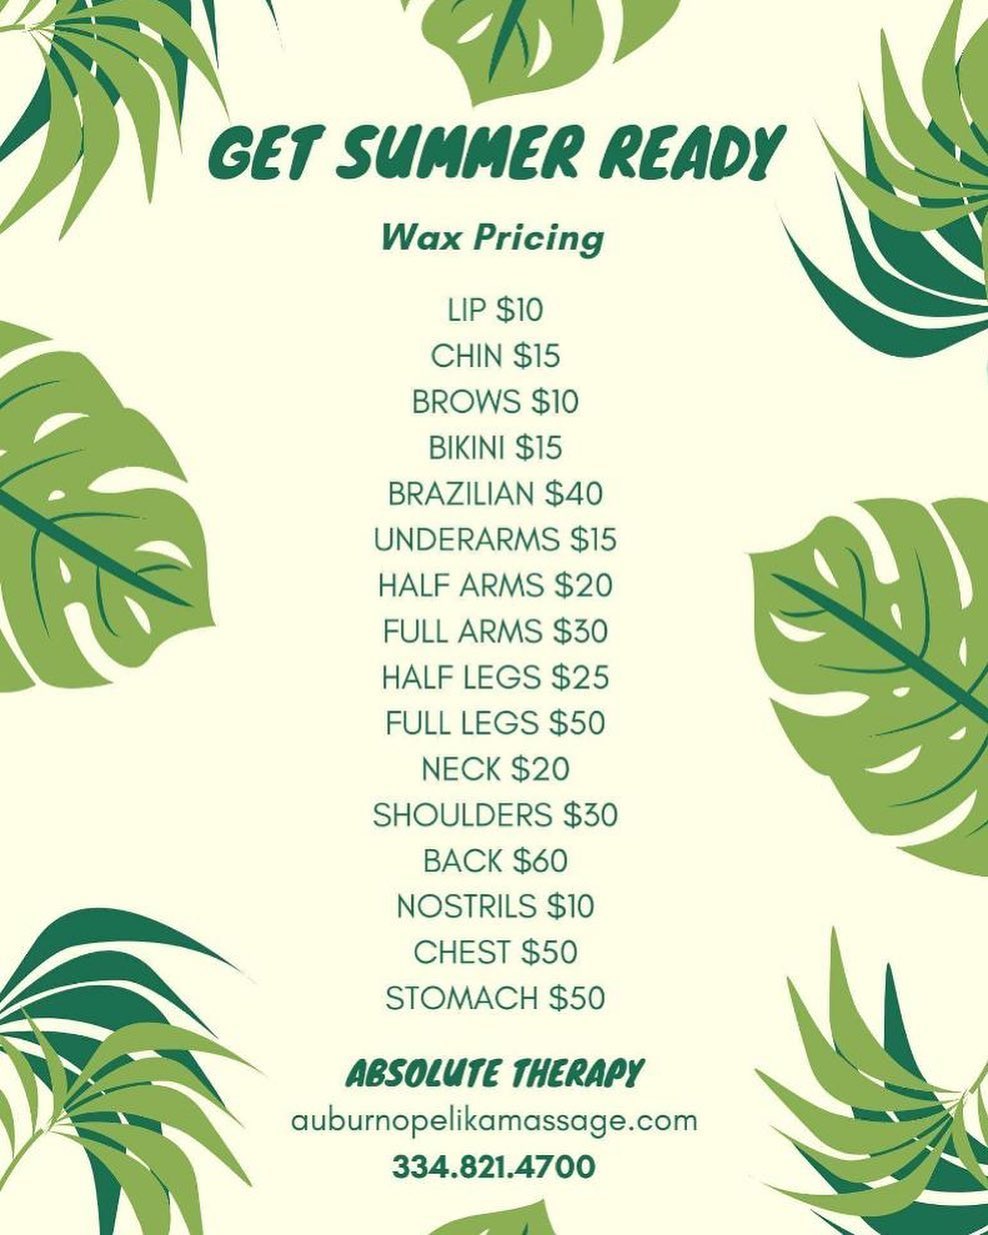 summer wax prices! hannah has a few last minute openings this afternoon if anyone needs an appointment